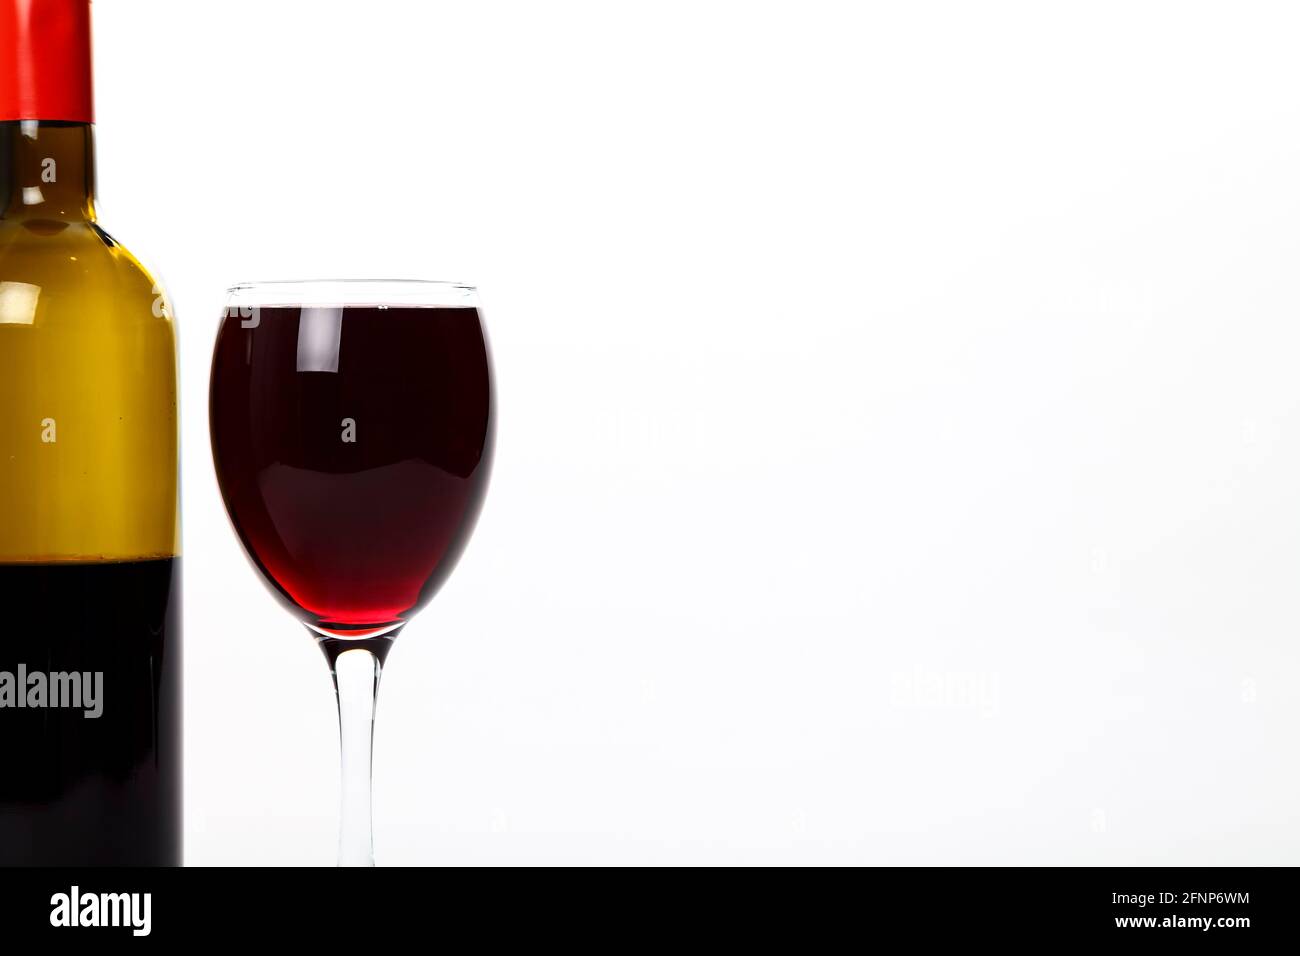 Glass of red wine and a wine bottle with space for copy Stock Photo